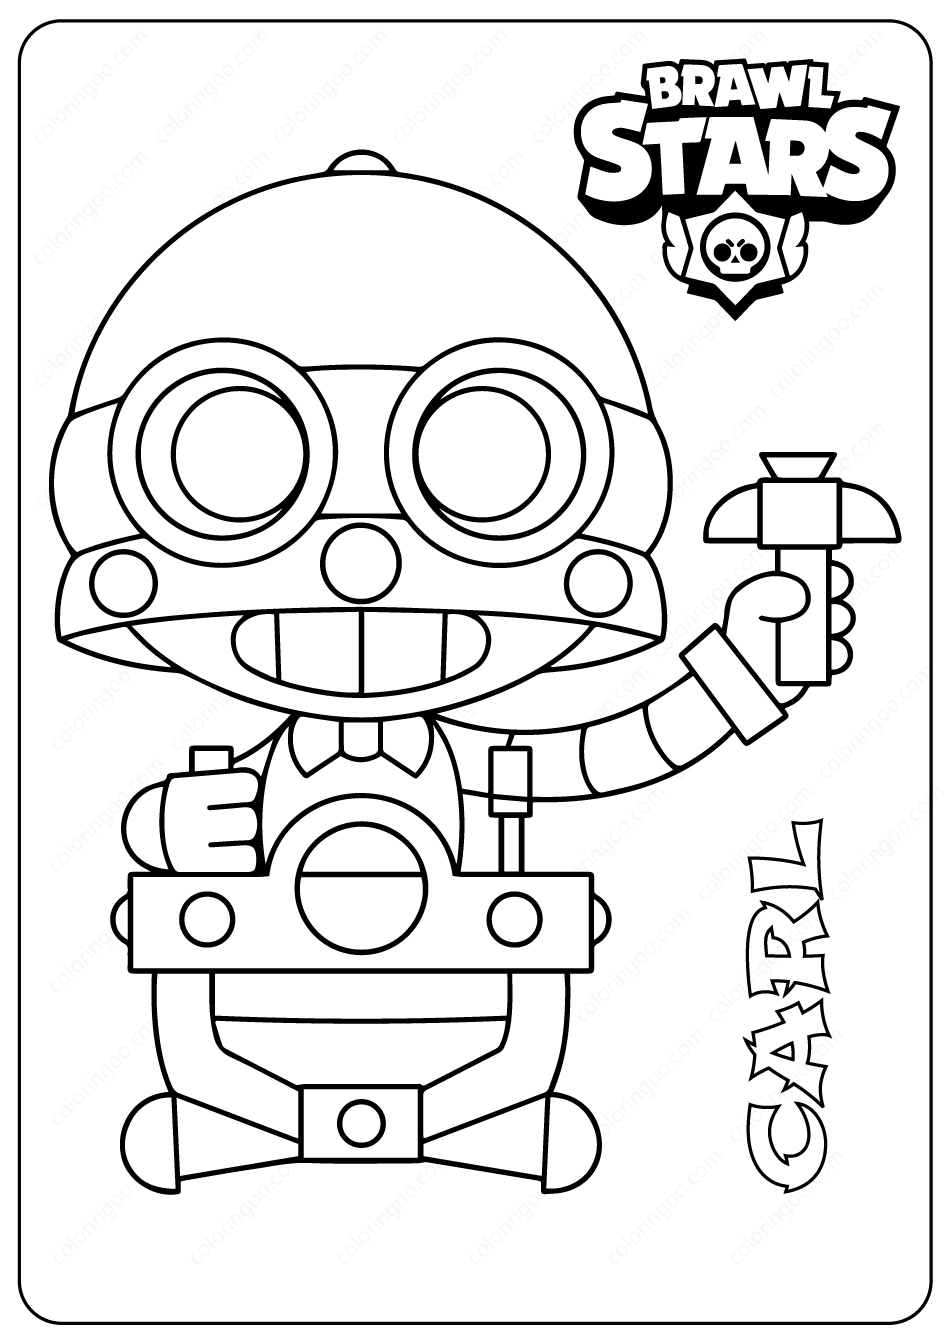 January 2020 - leon brawl stars coloring pages